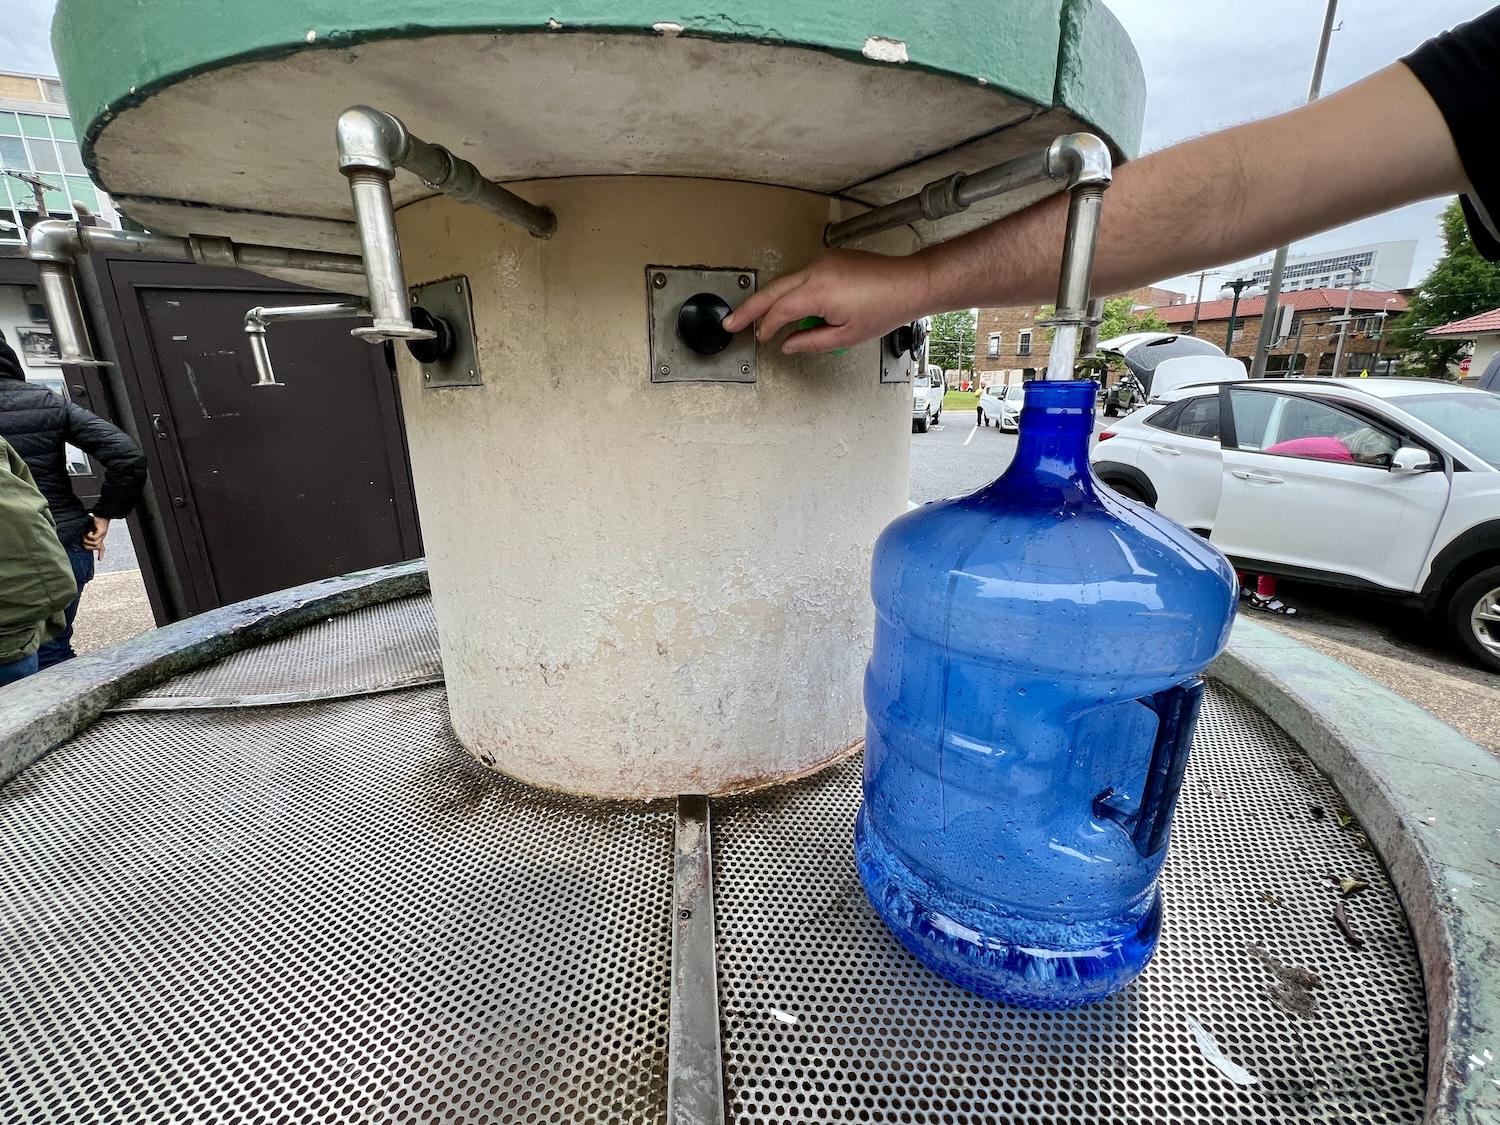 The National Parks Service offers free water at a few jug stations around Hot Springs, Arkansas.